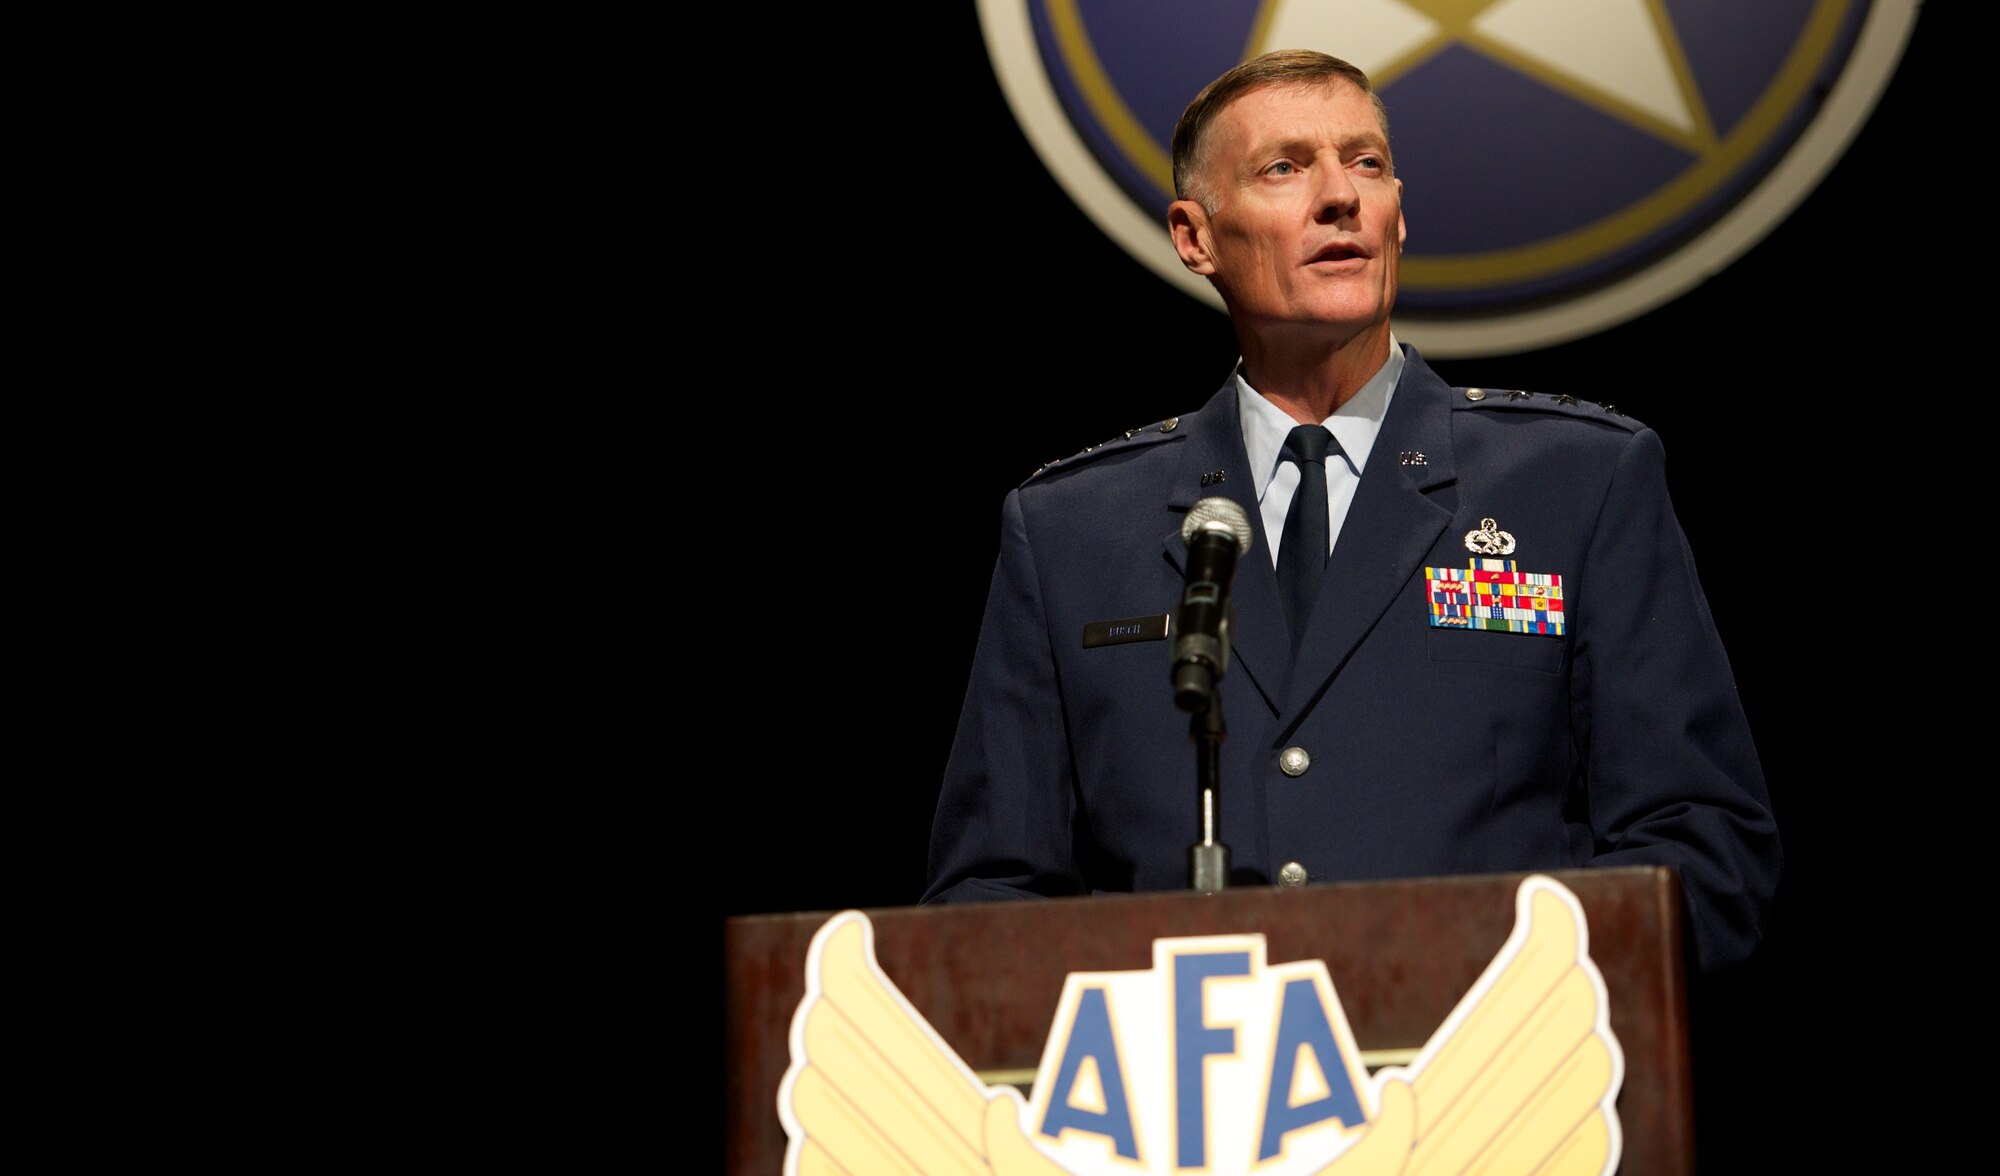 Lt. Gen. Andrew Bush delivers his perspective on recent structural changes within Air Force Materiel Command Nov. 22, 2013, at the Air Force Association’s Pacific Air & Space Symposium in Los Angeles, Calif. Bush outlined the impacts of budgetary constraints and sequestration on a largely civilian-supported command and highlighted progress despite fiscal challenges. Bush is the vice commander of AFMC.